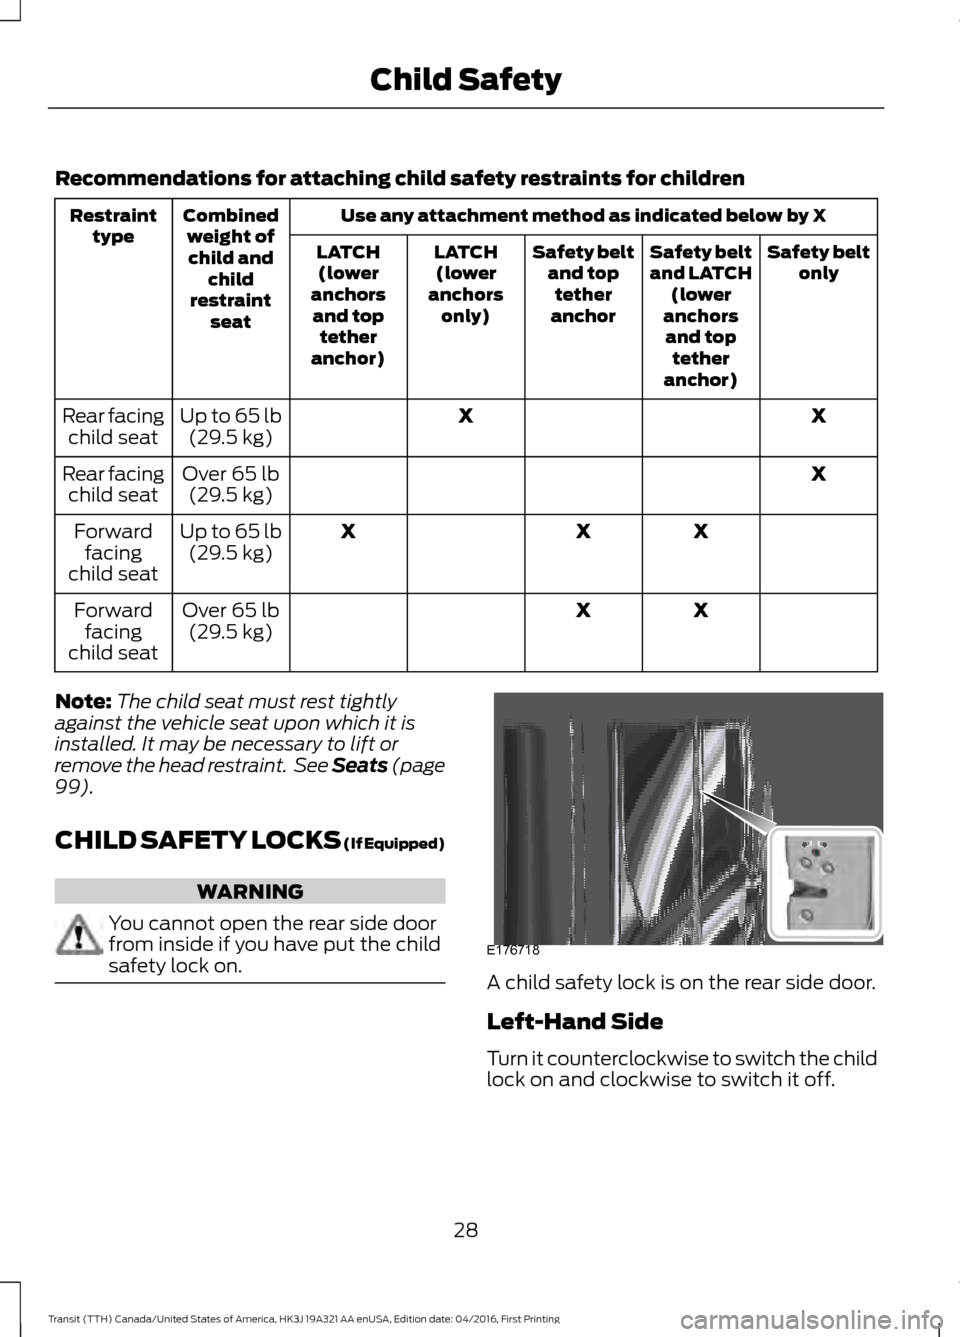 FORD TRANSIT 2017 5.G Owners Guide Recommendations for attaching child safety restraints for children
Use any attachment method as indicated below by X
Combined
weight ofchild and child
restraint seat
Restraint
type Safety belt
only
Sa